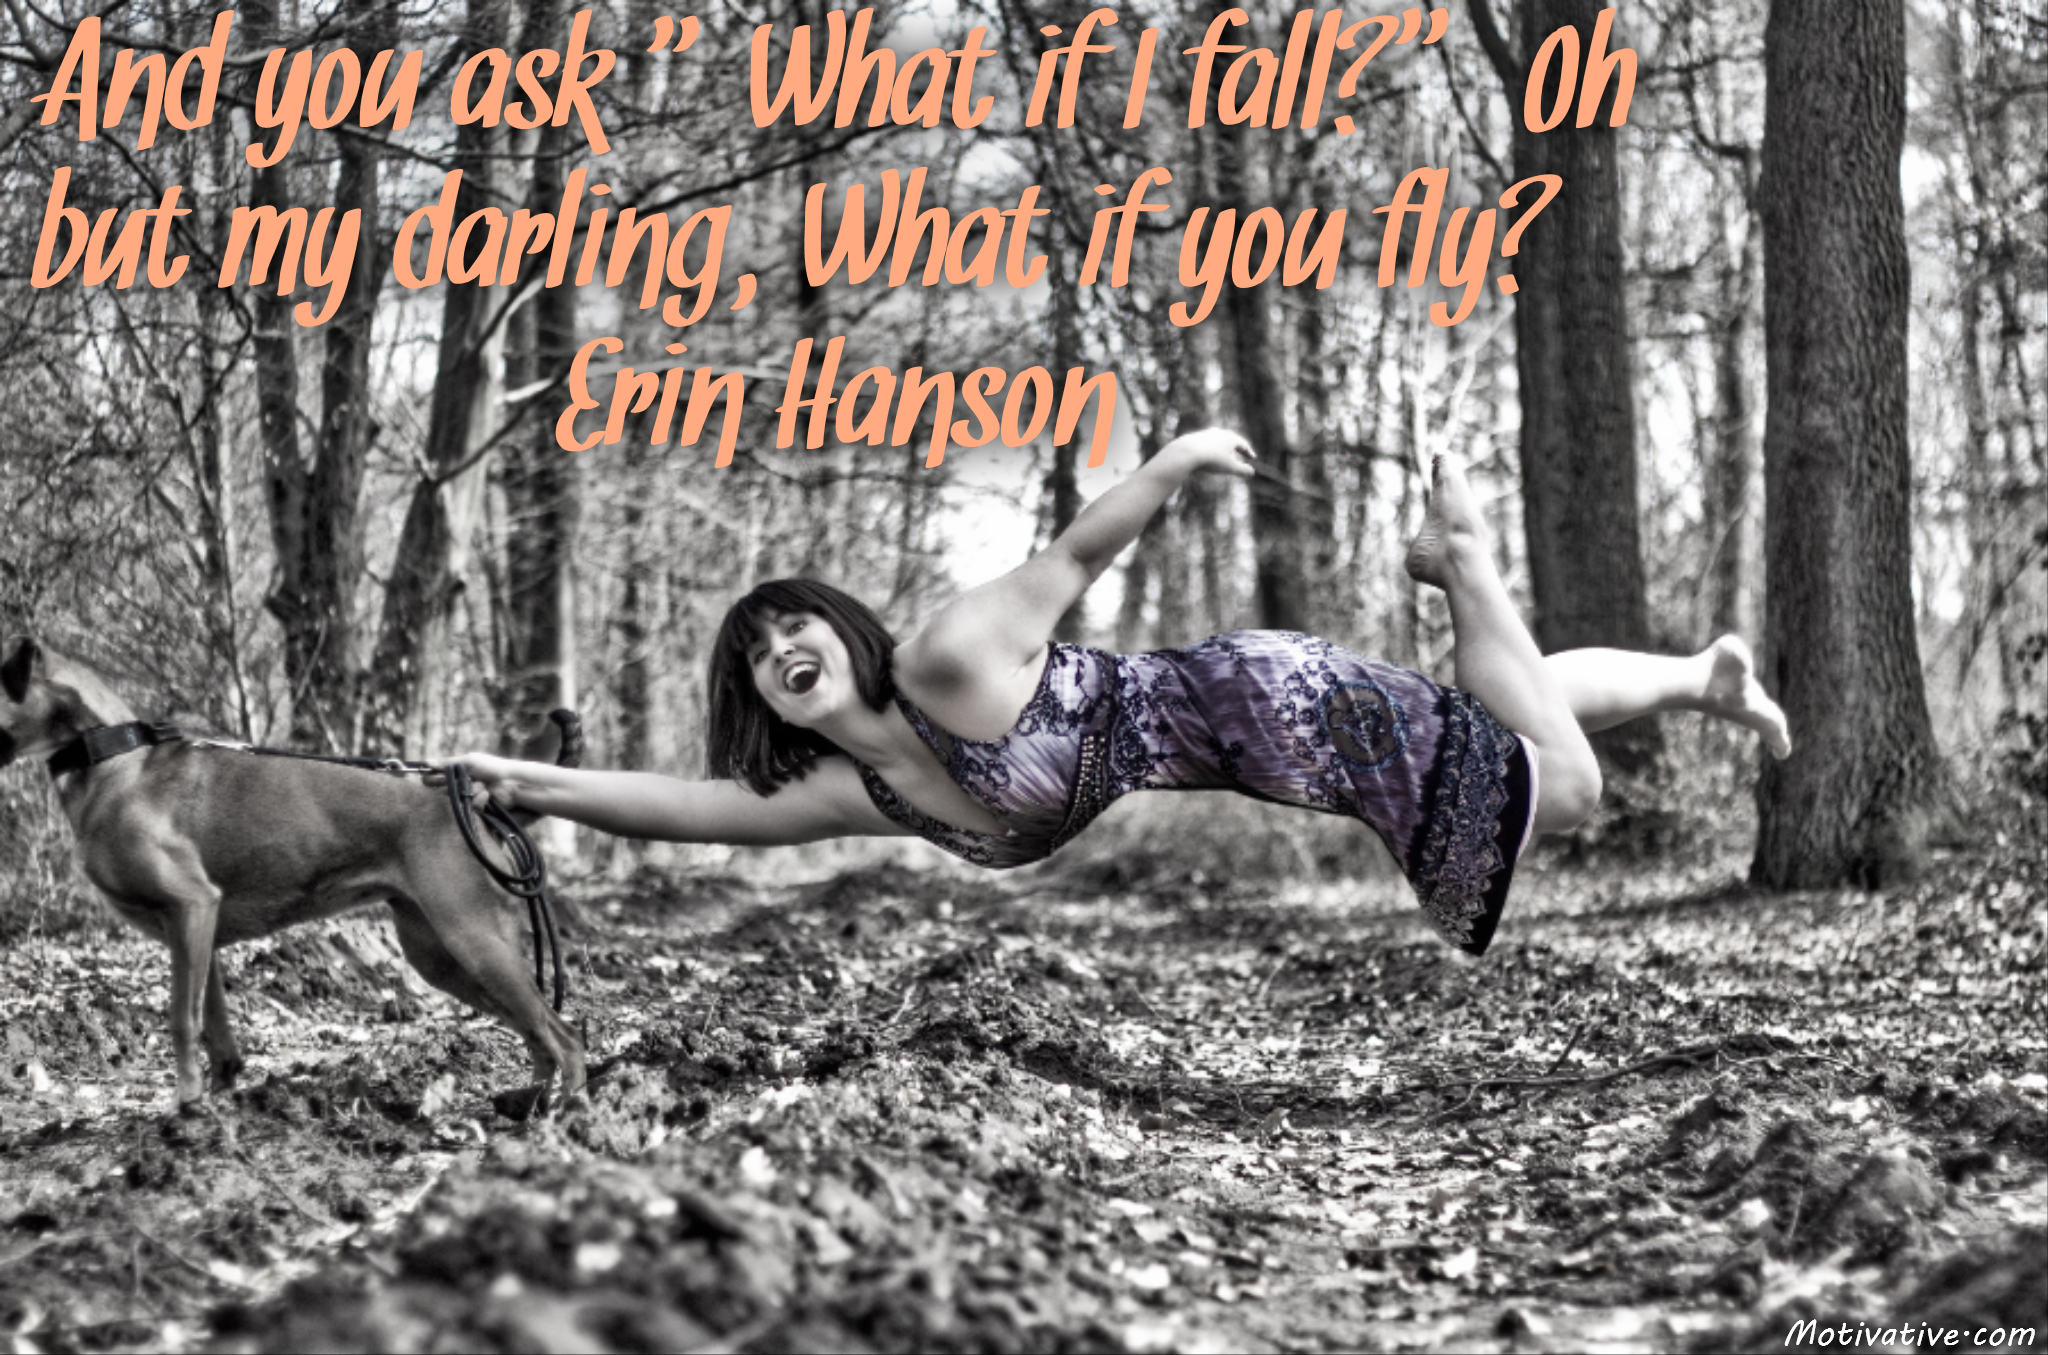 And you ask “What if I fall?” Oh but my darling, What if you fly? – Erin Hanson